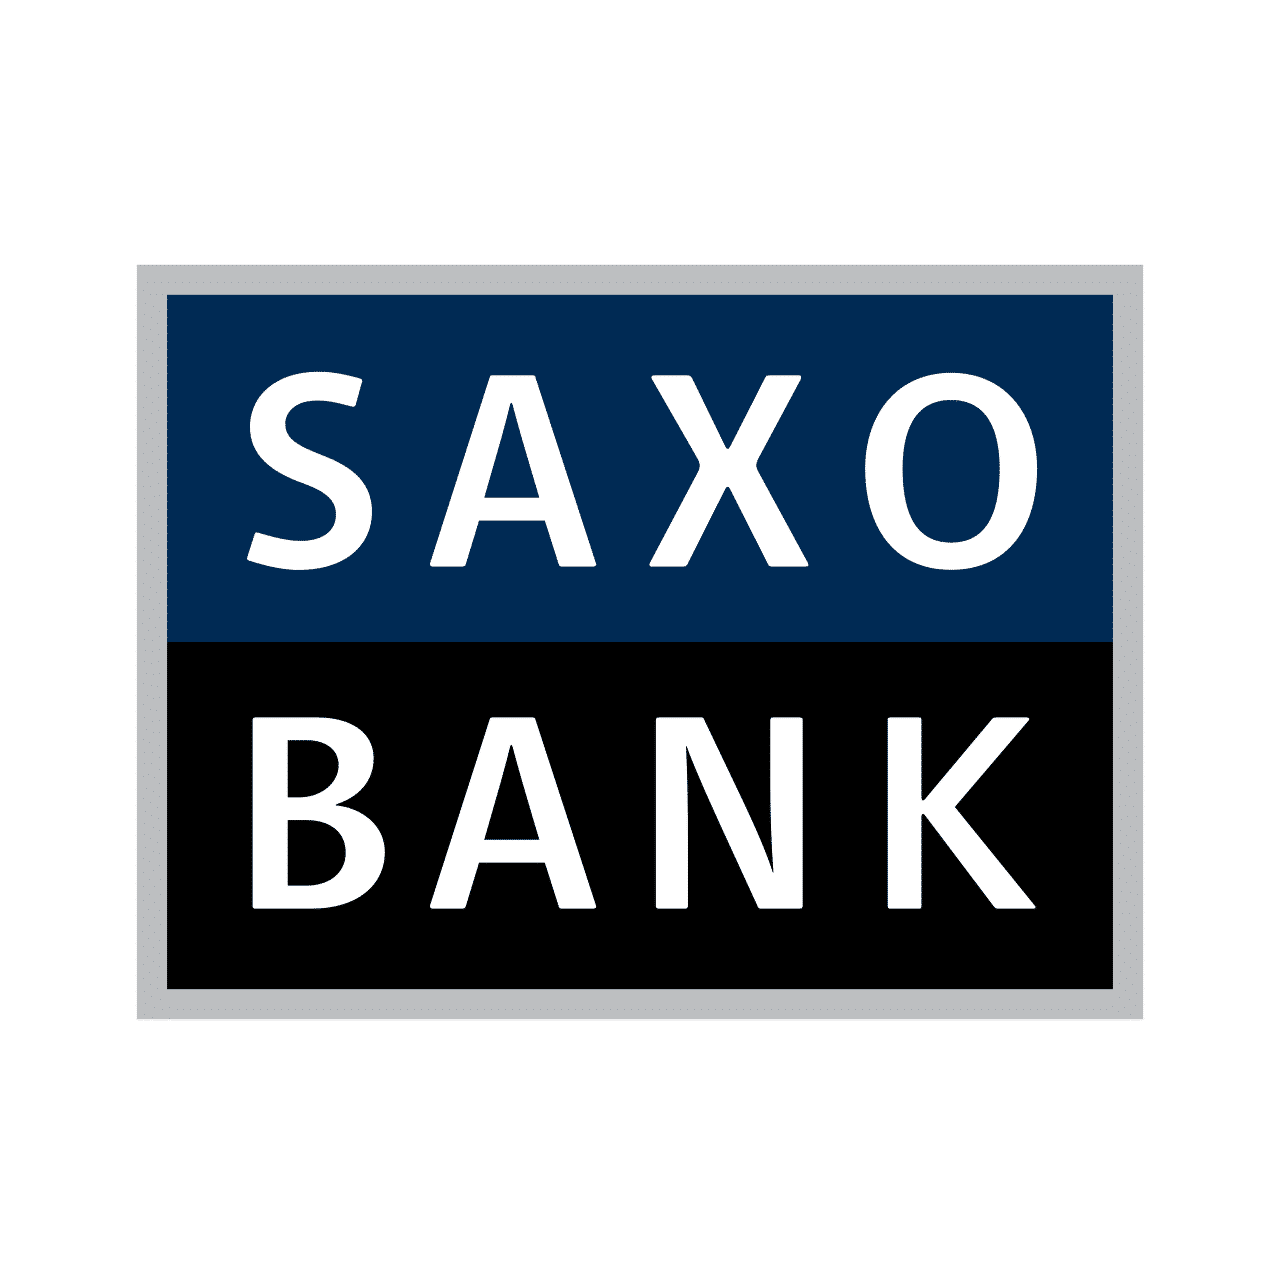 Saxo bank stock options and with it binary options ...